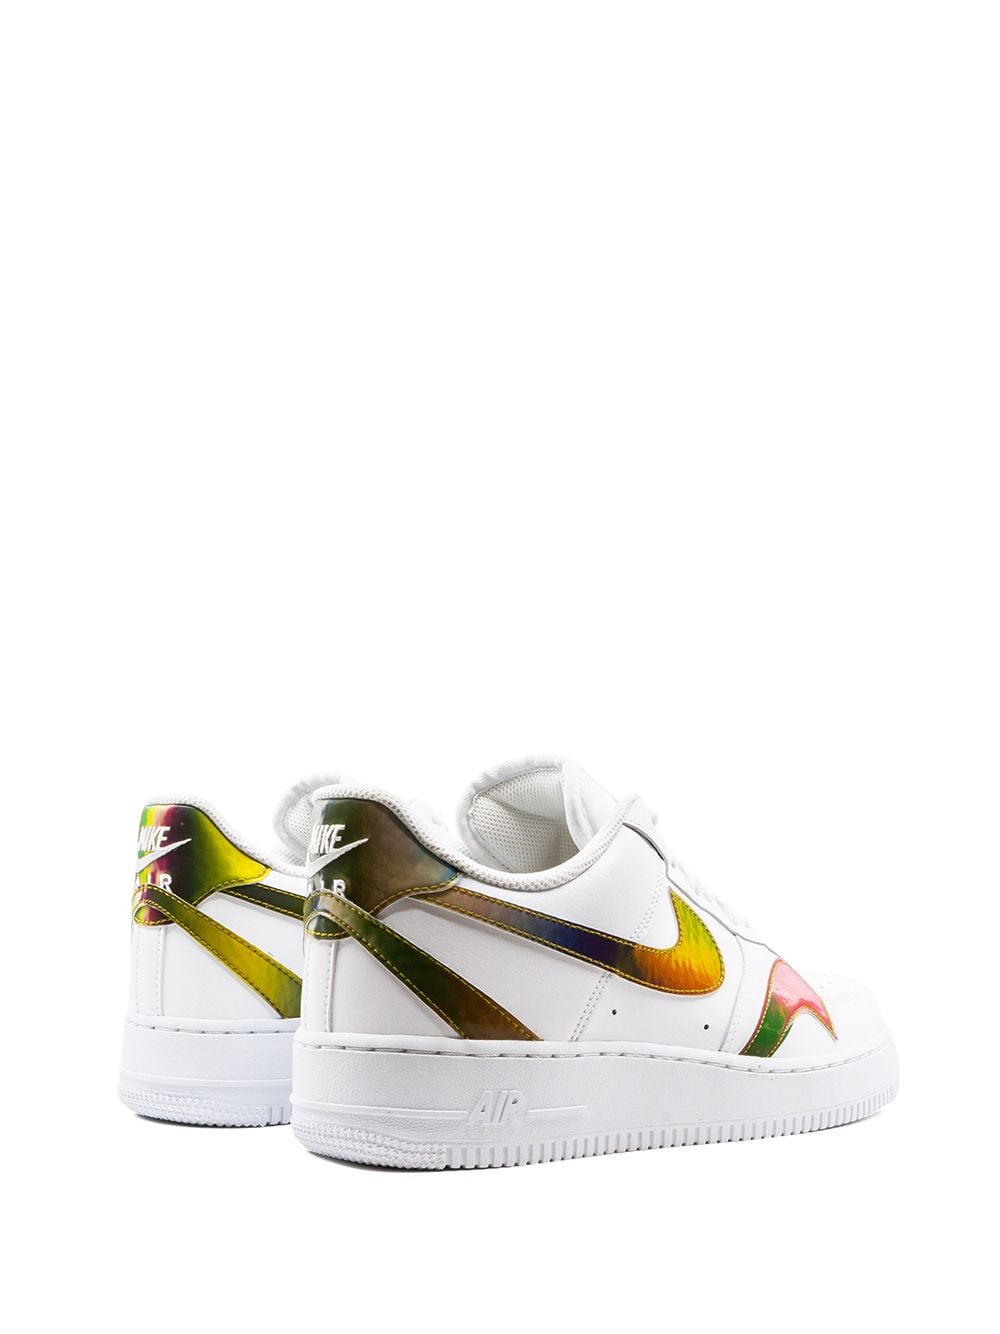 Nike Air Force 1 LV8 Misplaced Swooshes CZ5890-001 from 116,00 €